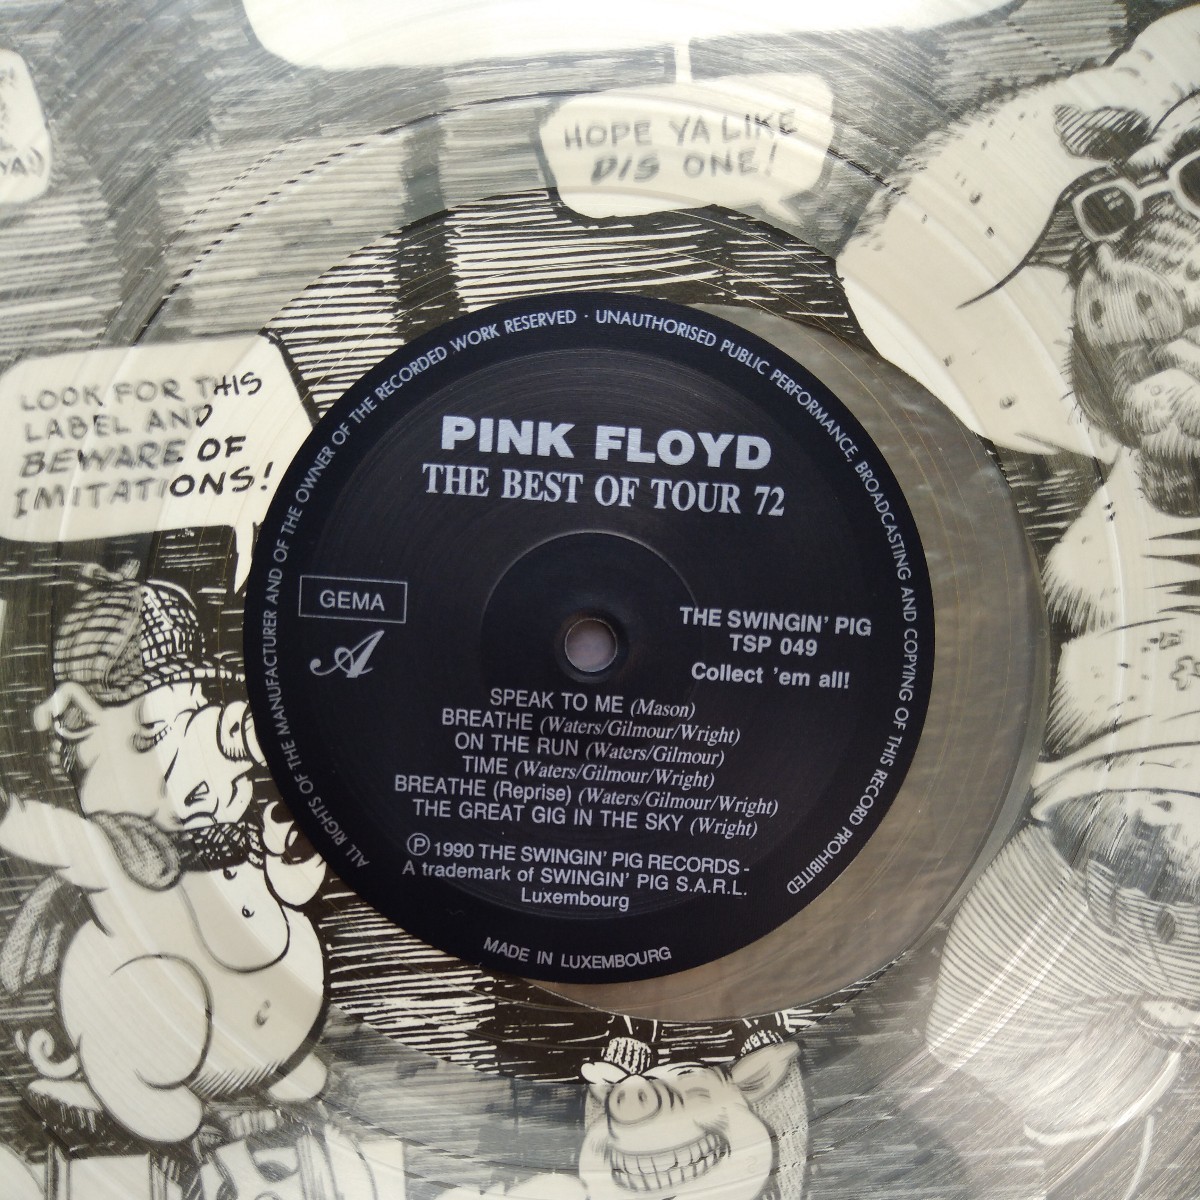 pink floyd the best of tour 72 ピンク・フロイド live analog record vinly レコード アナログ LPの画像4